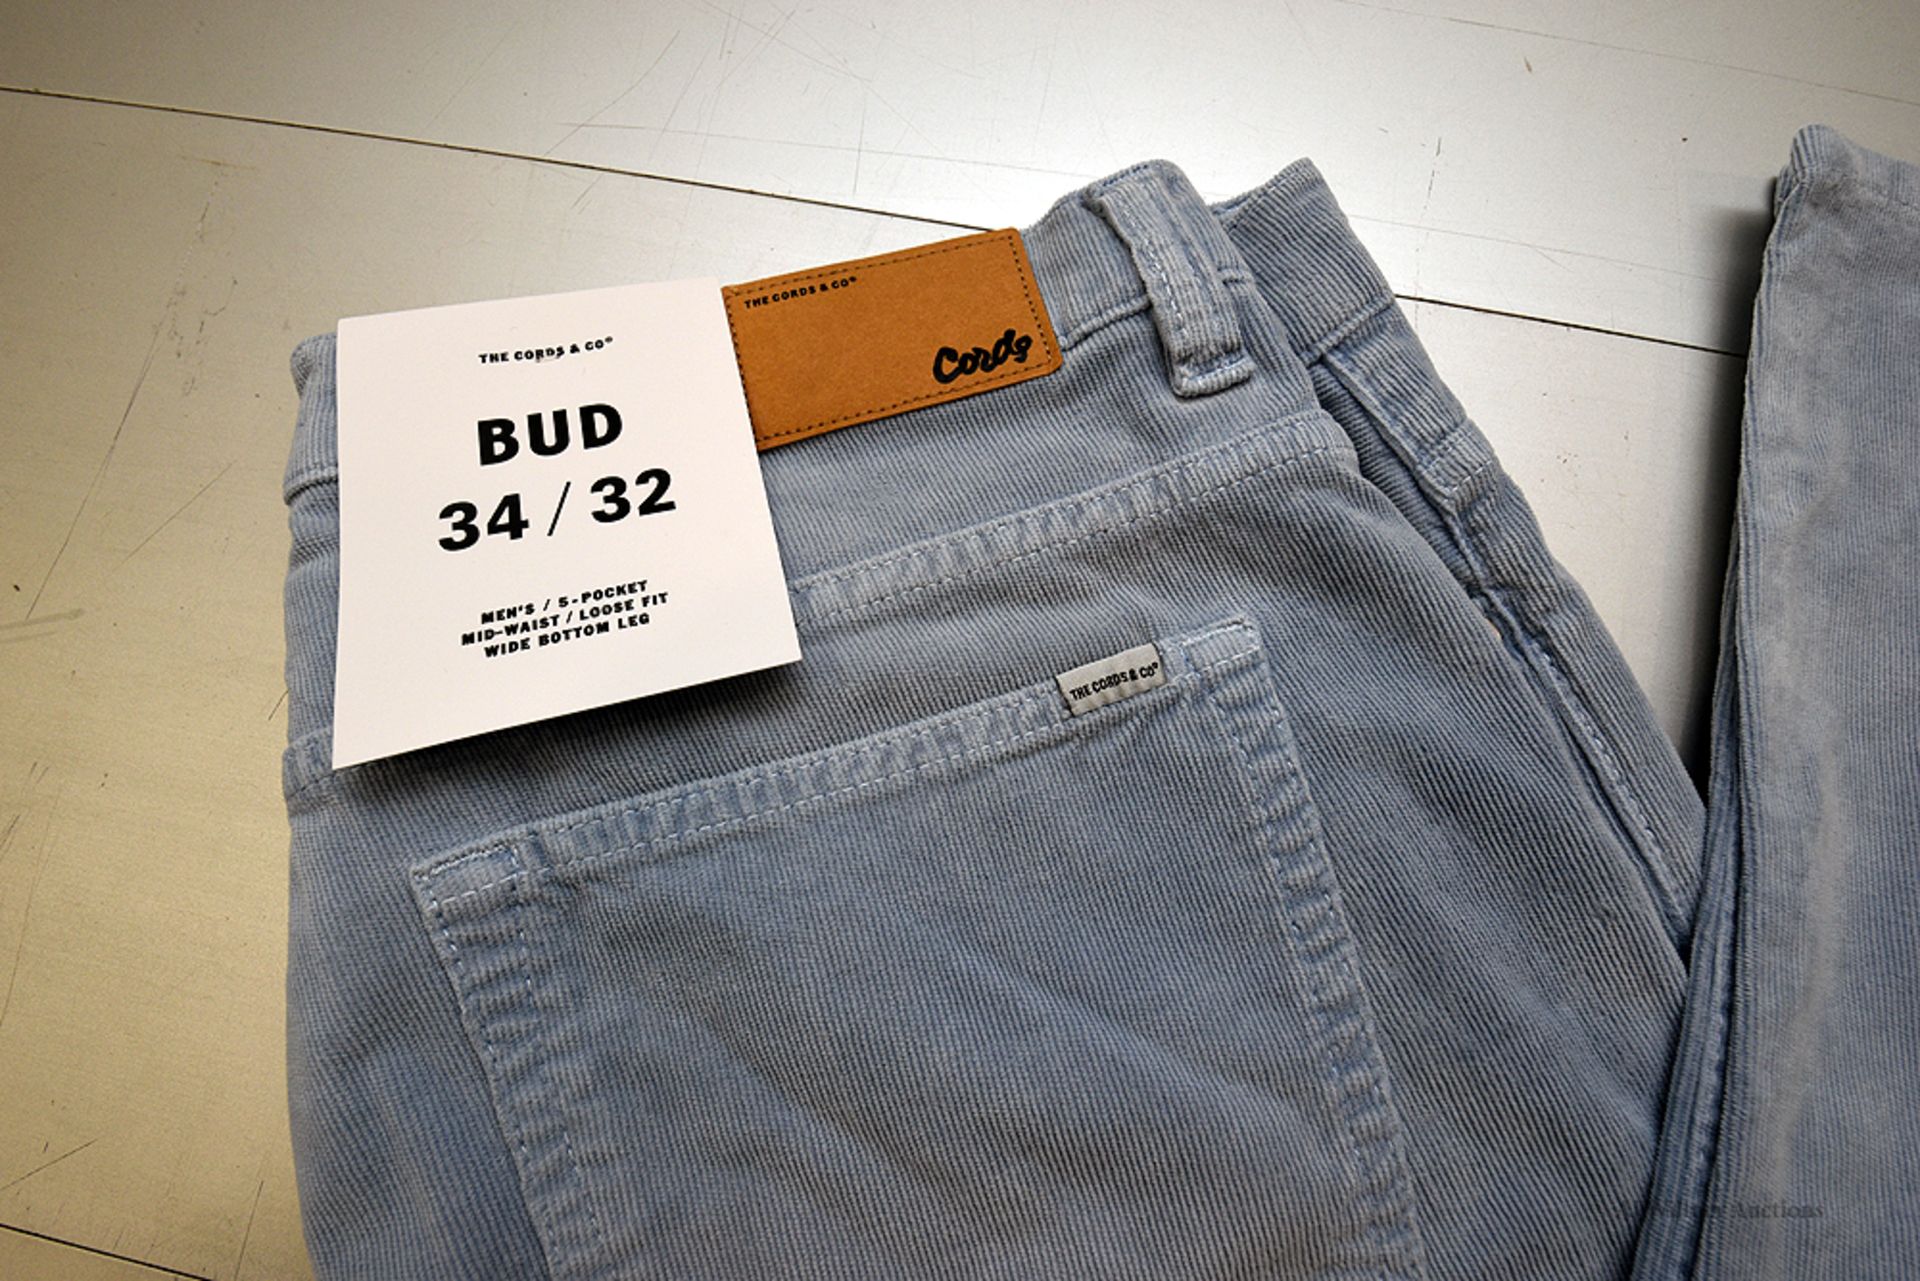 The Cords & Co. "Bud" Style, Mens/5-Pocket/Mid-Waist/ Loose Fit/ Wide Bottom Leg Pants (Denim Blue) - Image 2 of 3